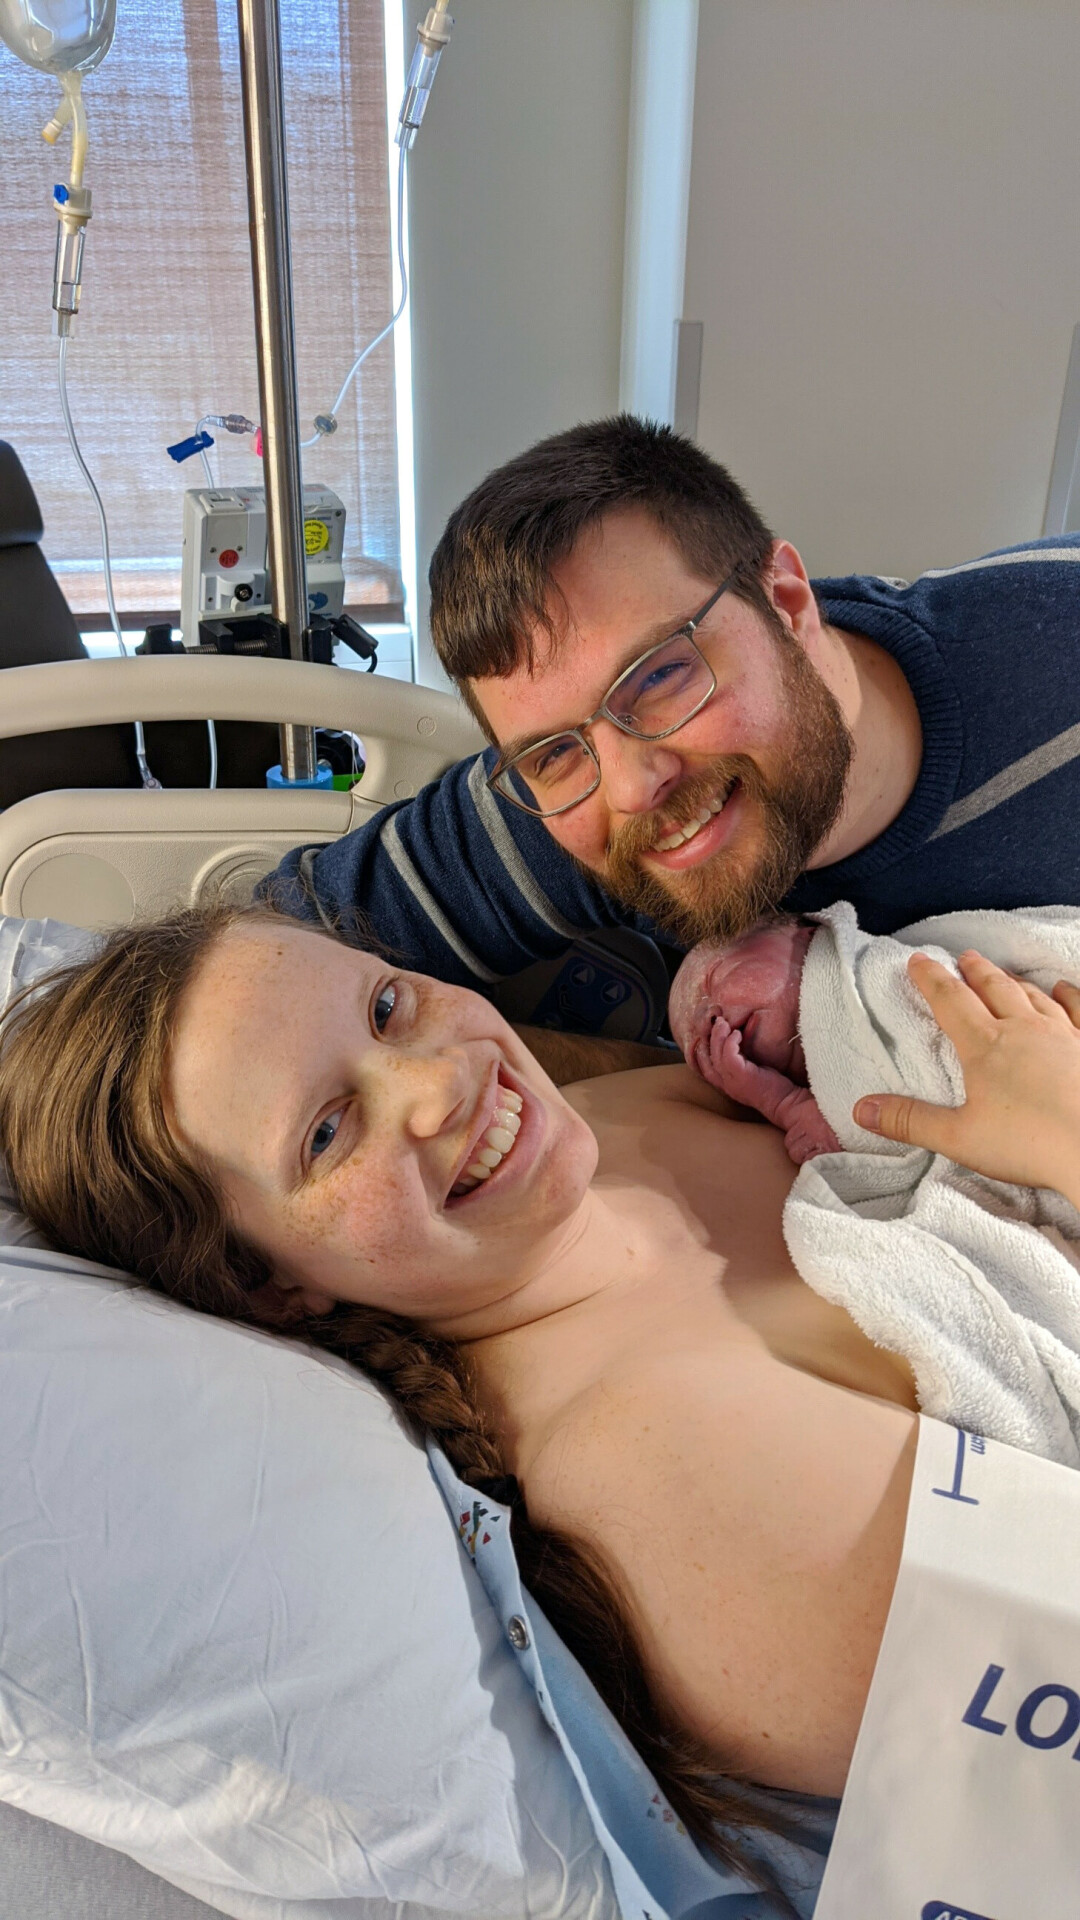 The Donahoe family recently welcomed their bundle of joy, Violet, into the uncertain and chaotic world.